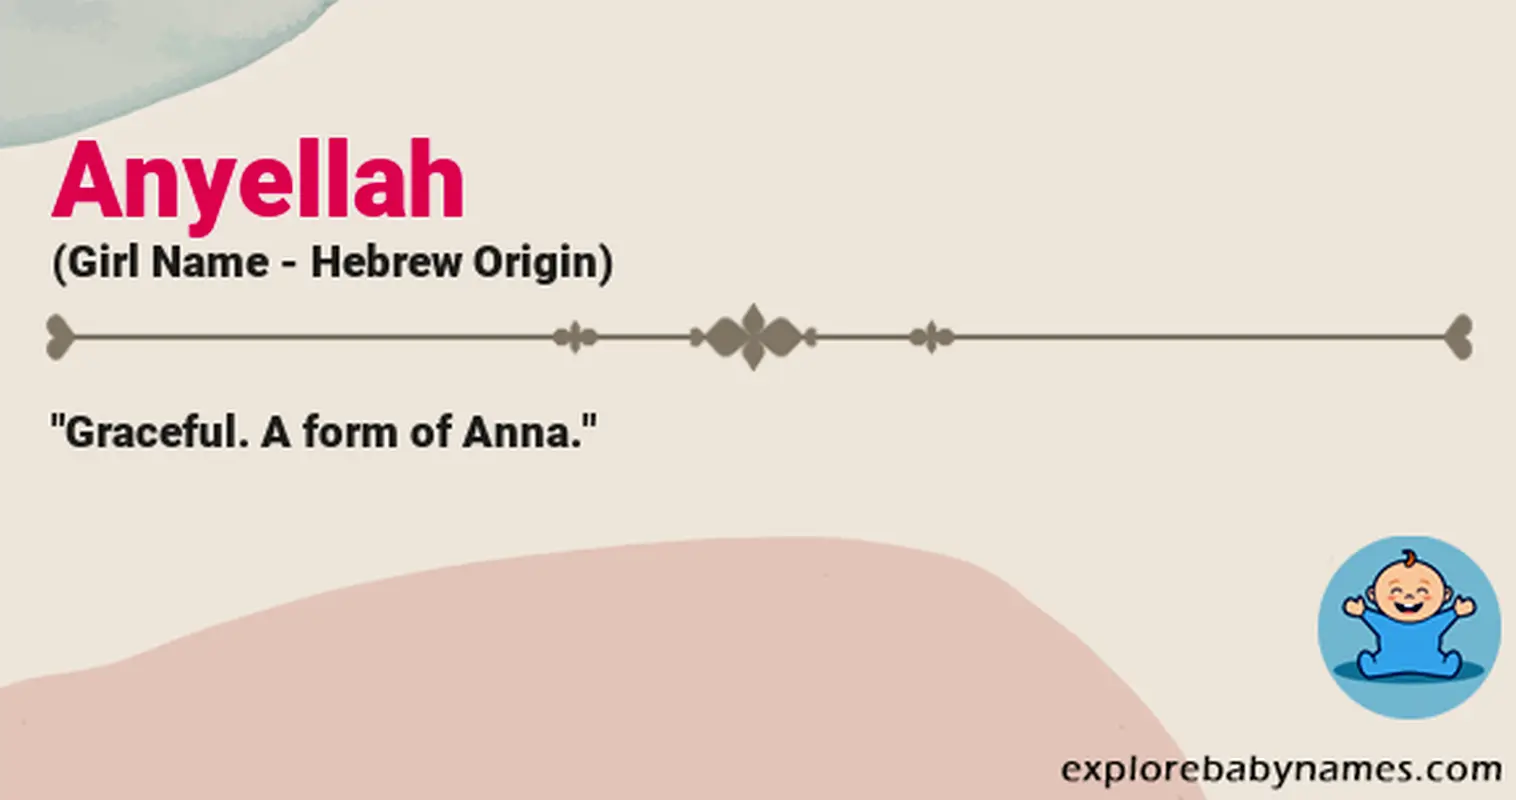 Meaning of Anyellah